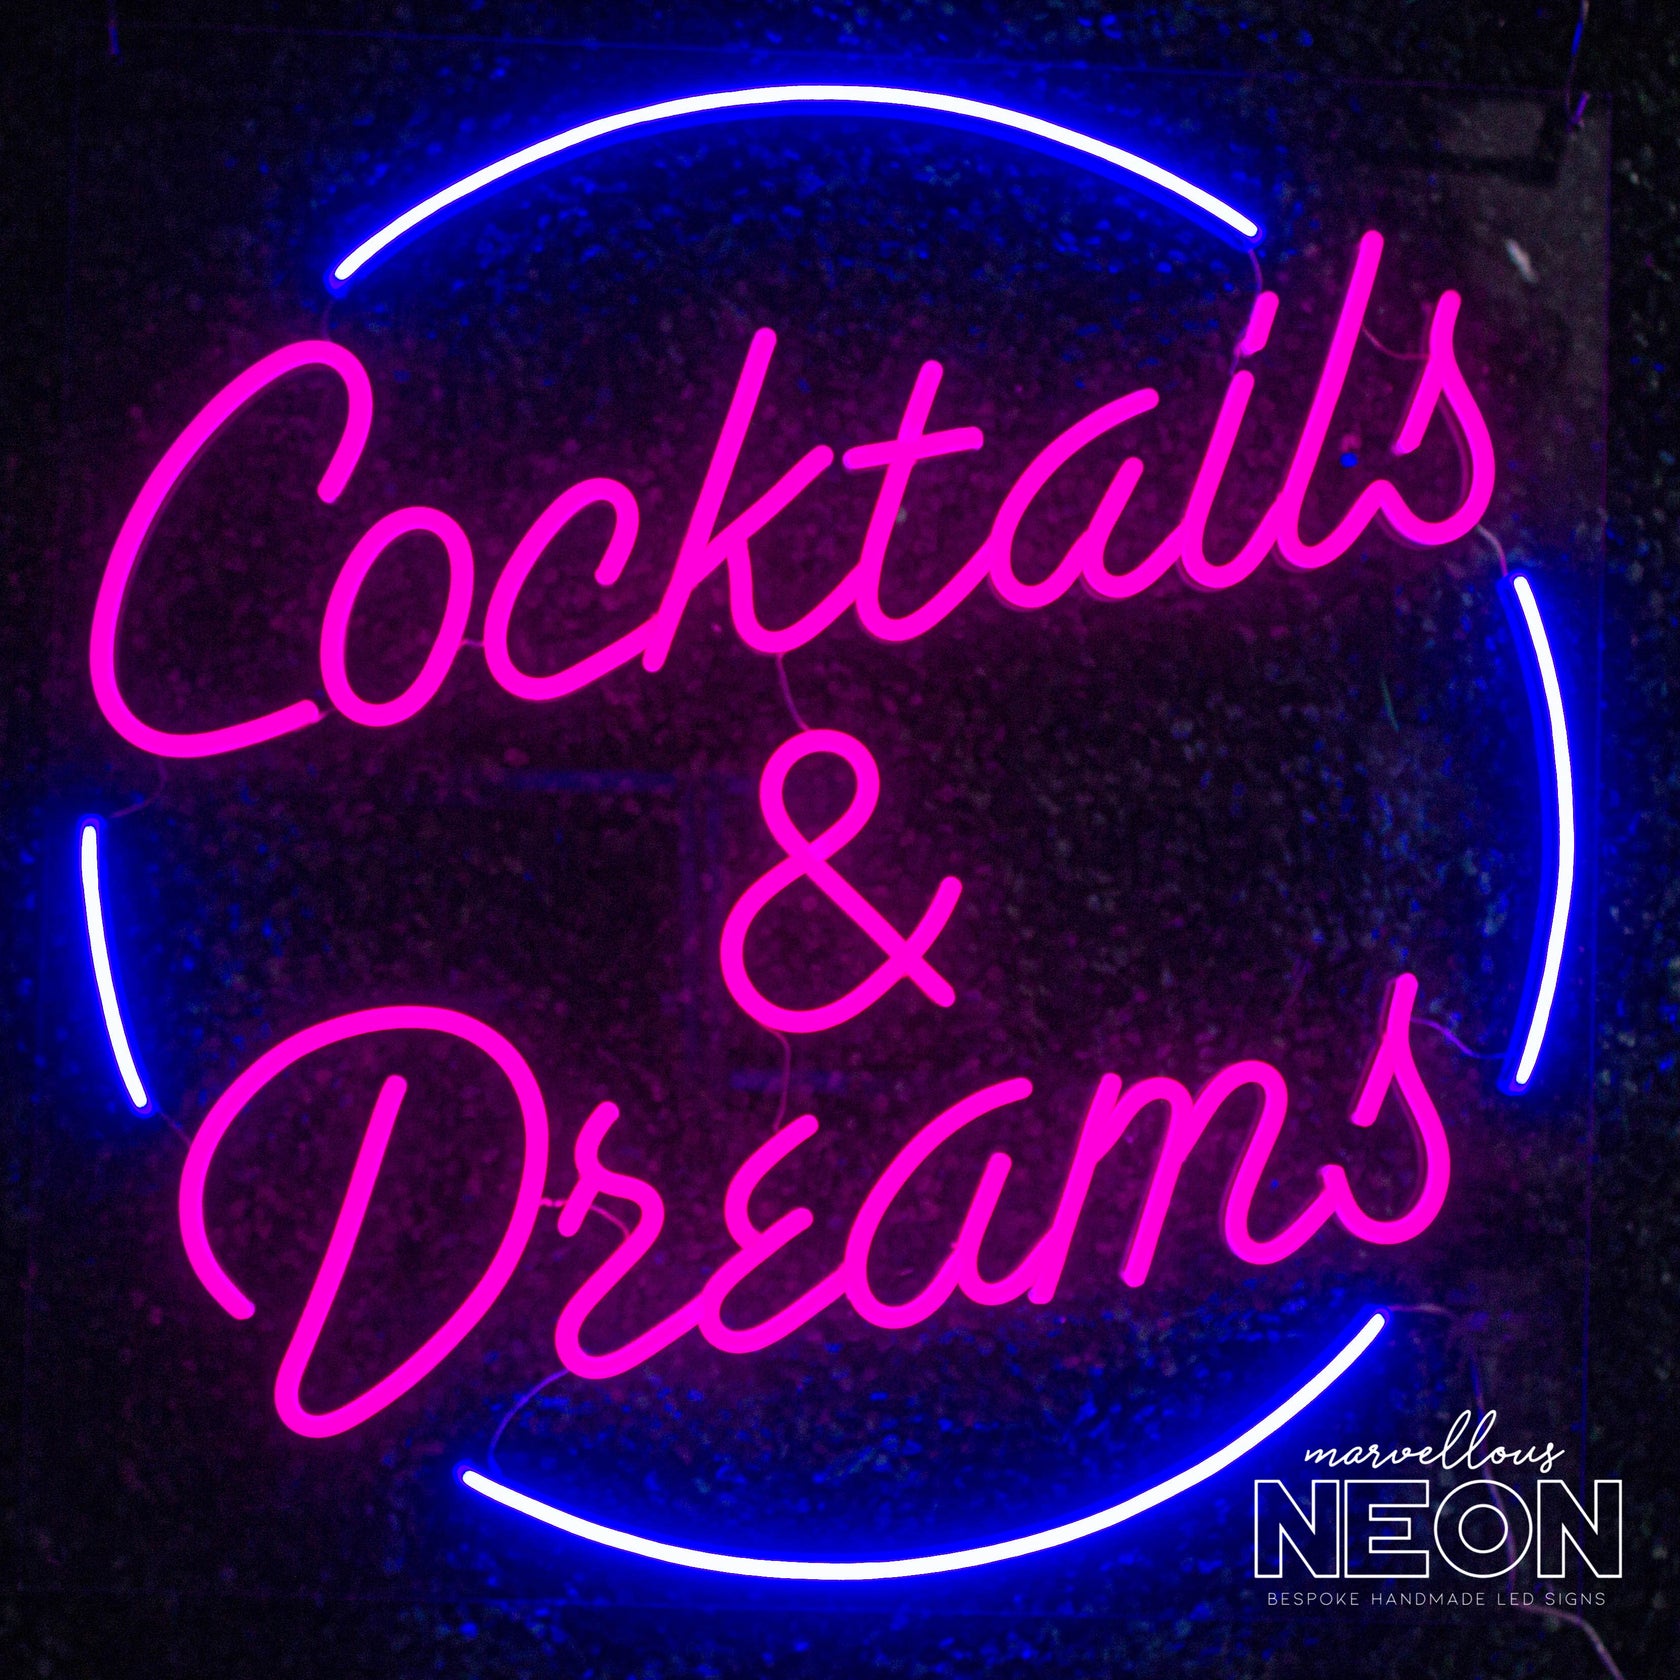 Cocktails & Dreams Neon Led Sign | Buy Custom Neon Signs Online